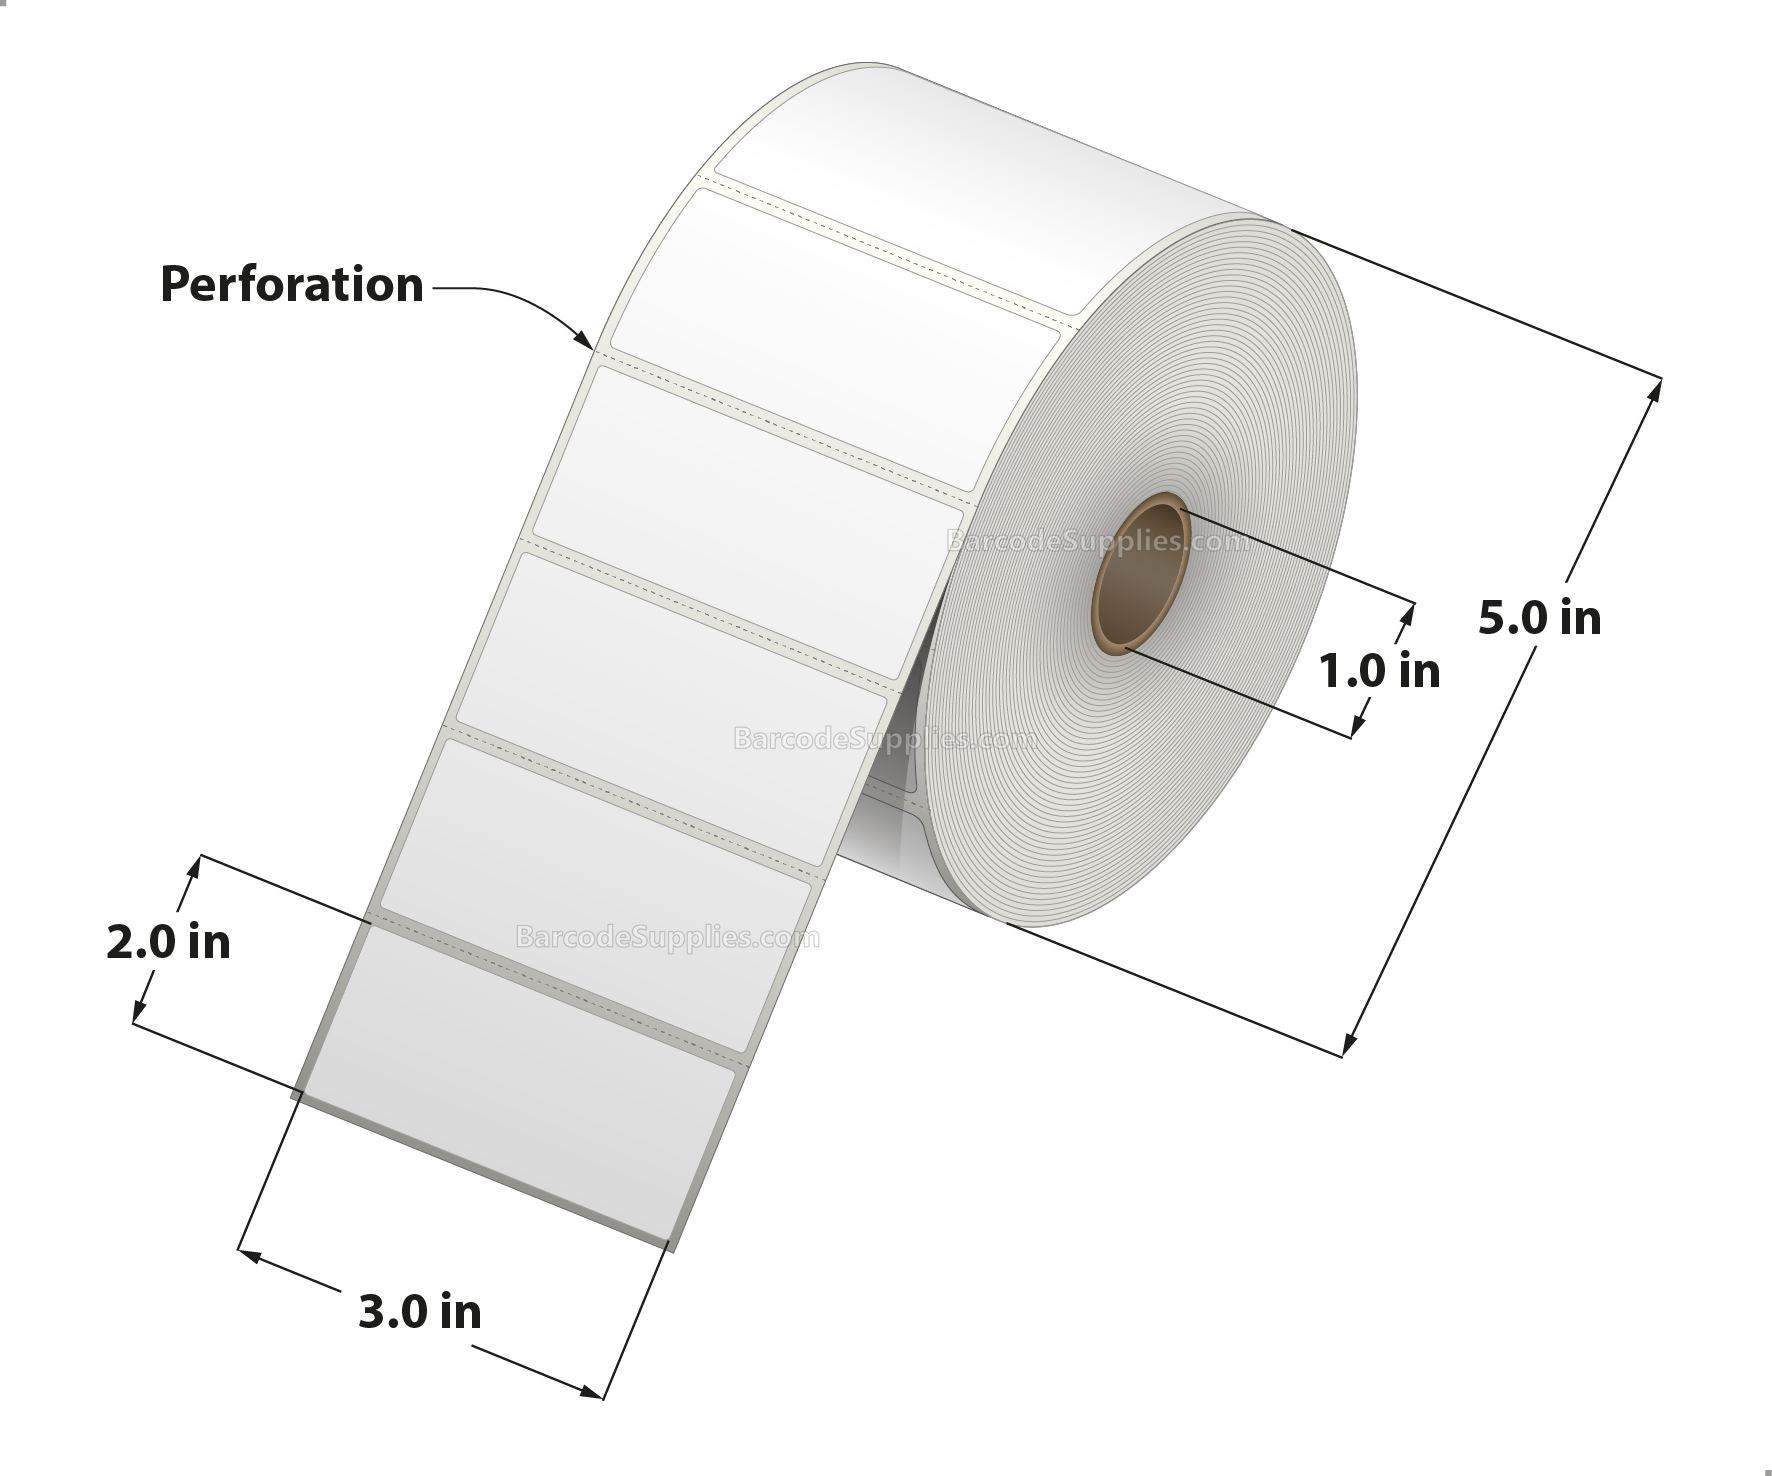 3 x 2 Thermal Transfer White Labels With Permanent Acrylic Adhesive - Perforated - 1240 Labels Per Roll - Carton Of 4 Rolls - 4960 Labels Total - MPN: TH32-15PTT